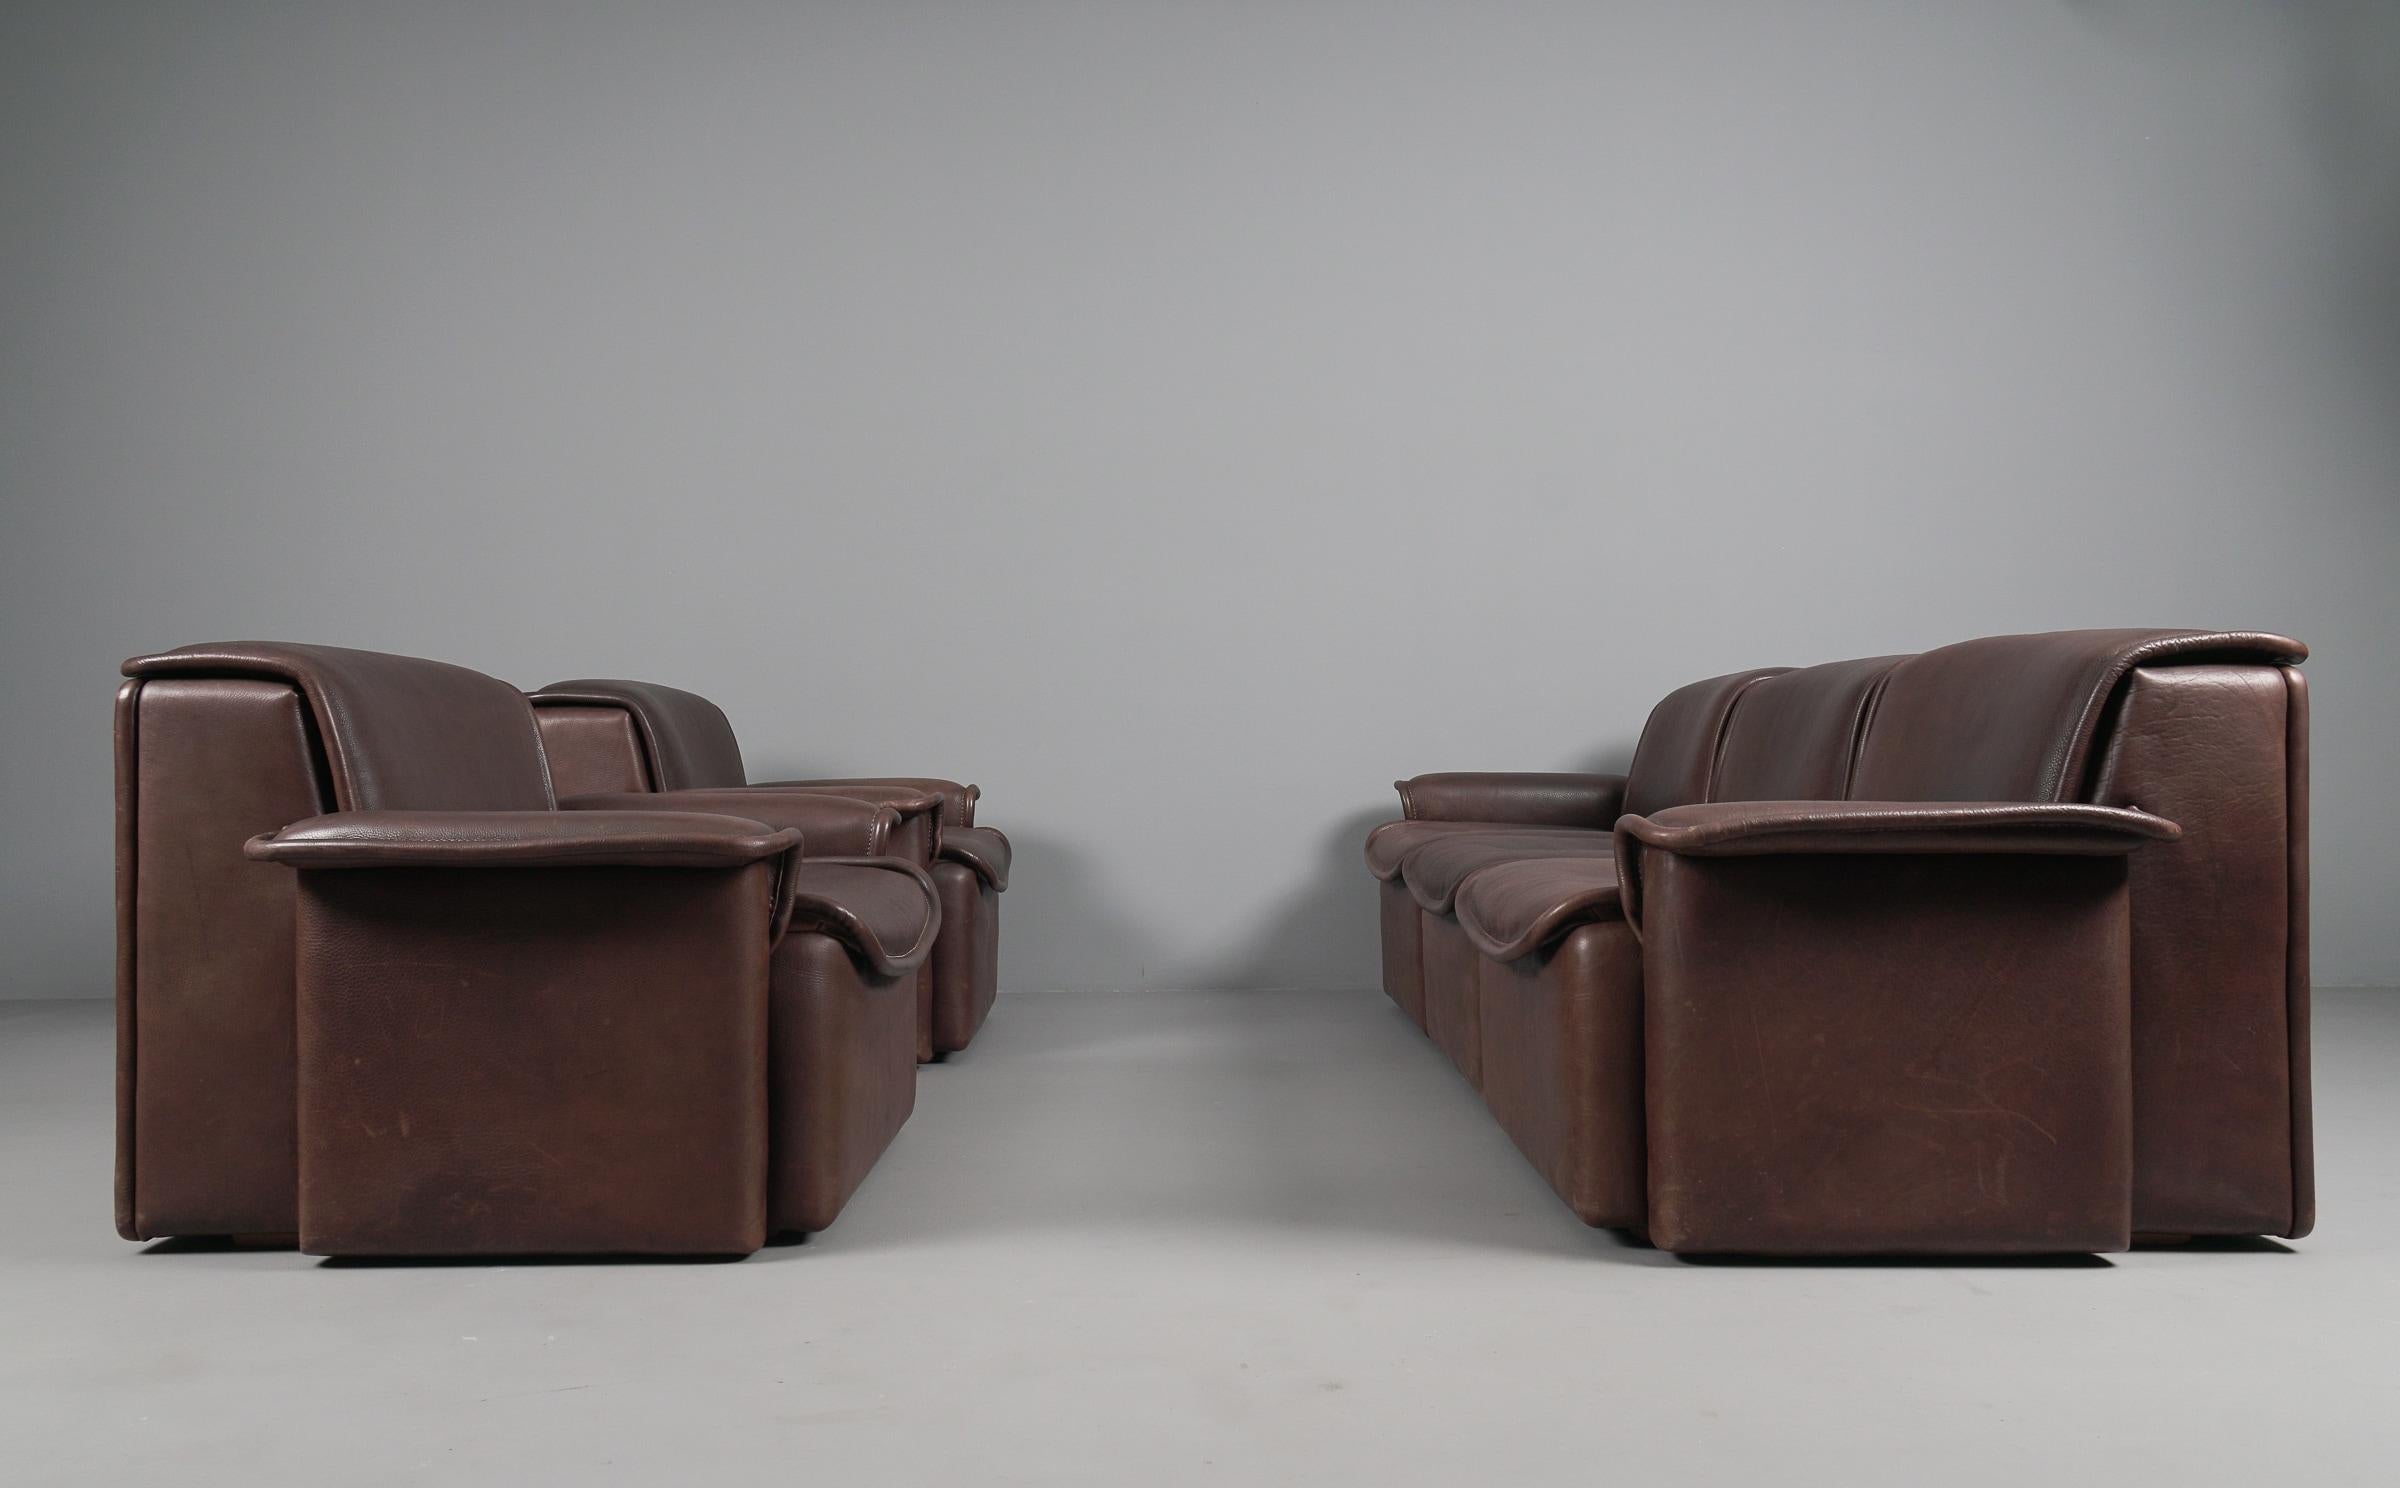 Three Seater Sofa by De Sede DS-12 in Brown Neck Leather, 1960s, Switzerland For Sale 12